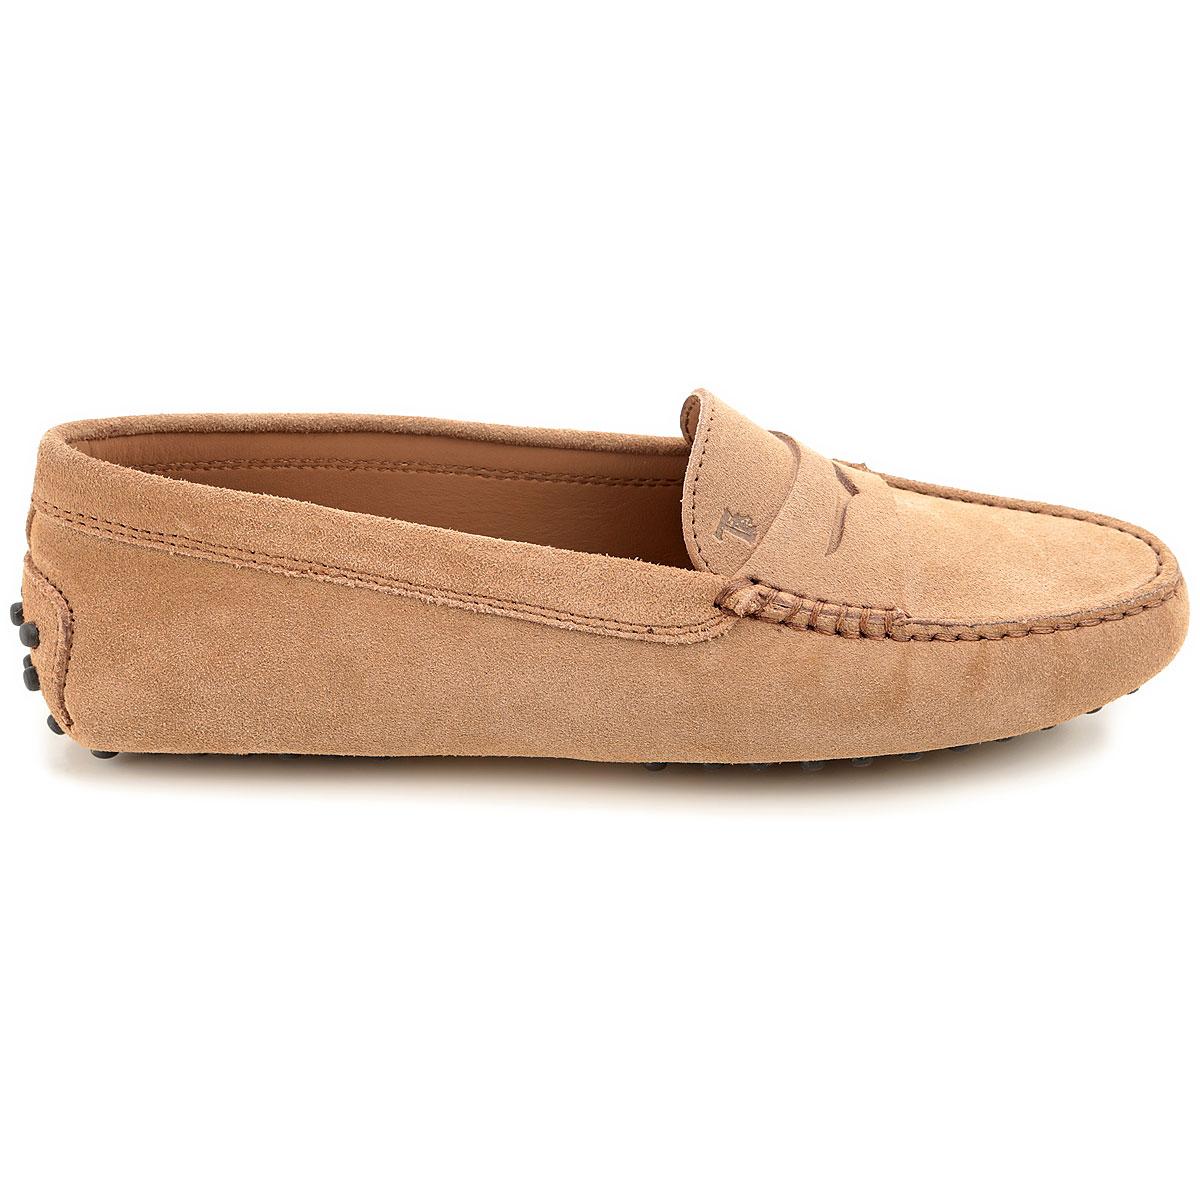 Tod's Leather Loafers For Women On Sale in Sand (Natural) - Lyst